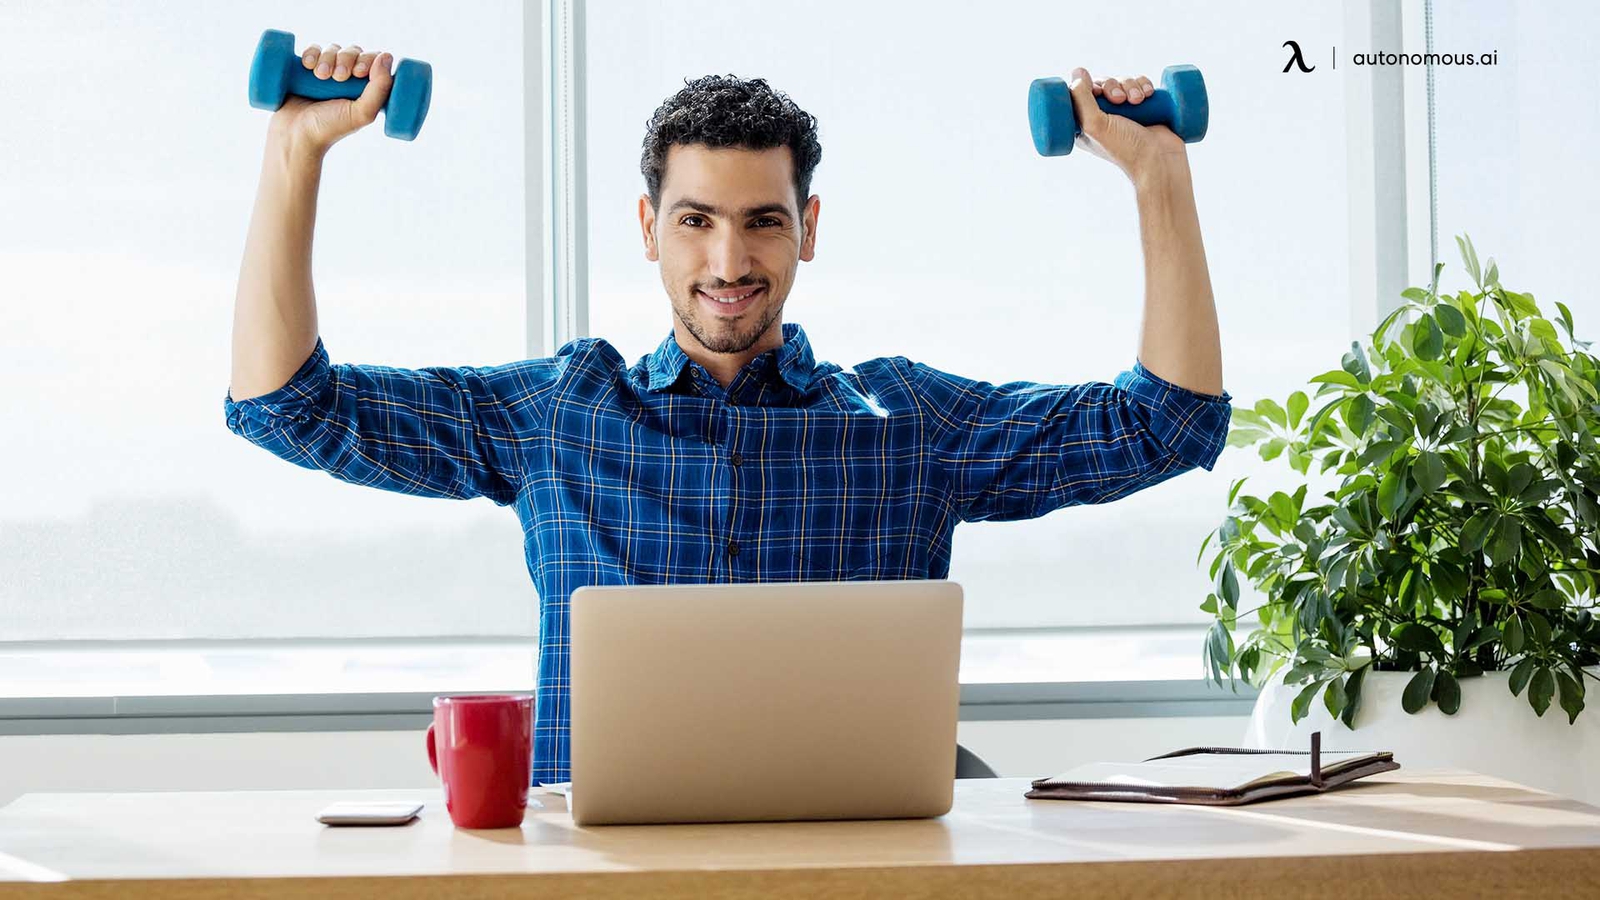 15 Best Office Desk Exercises Equipment to Help Stay Fit